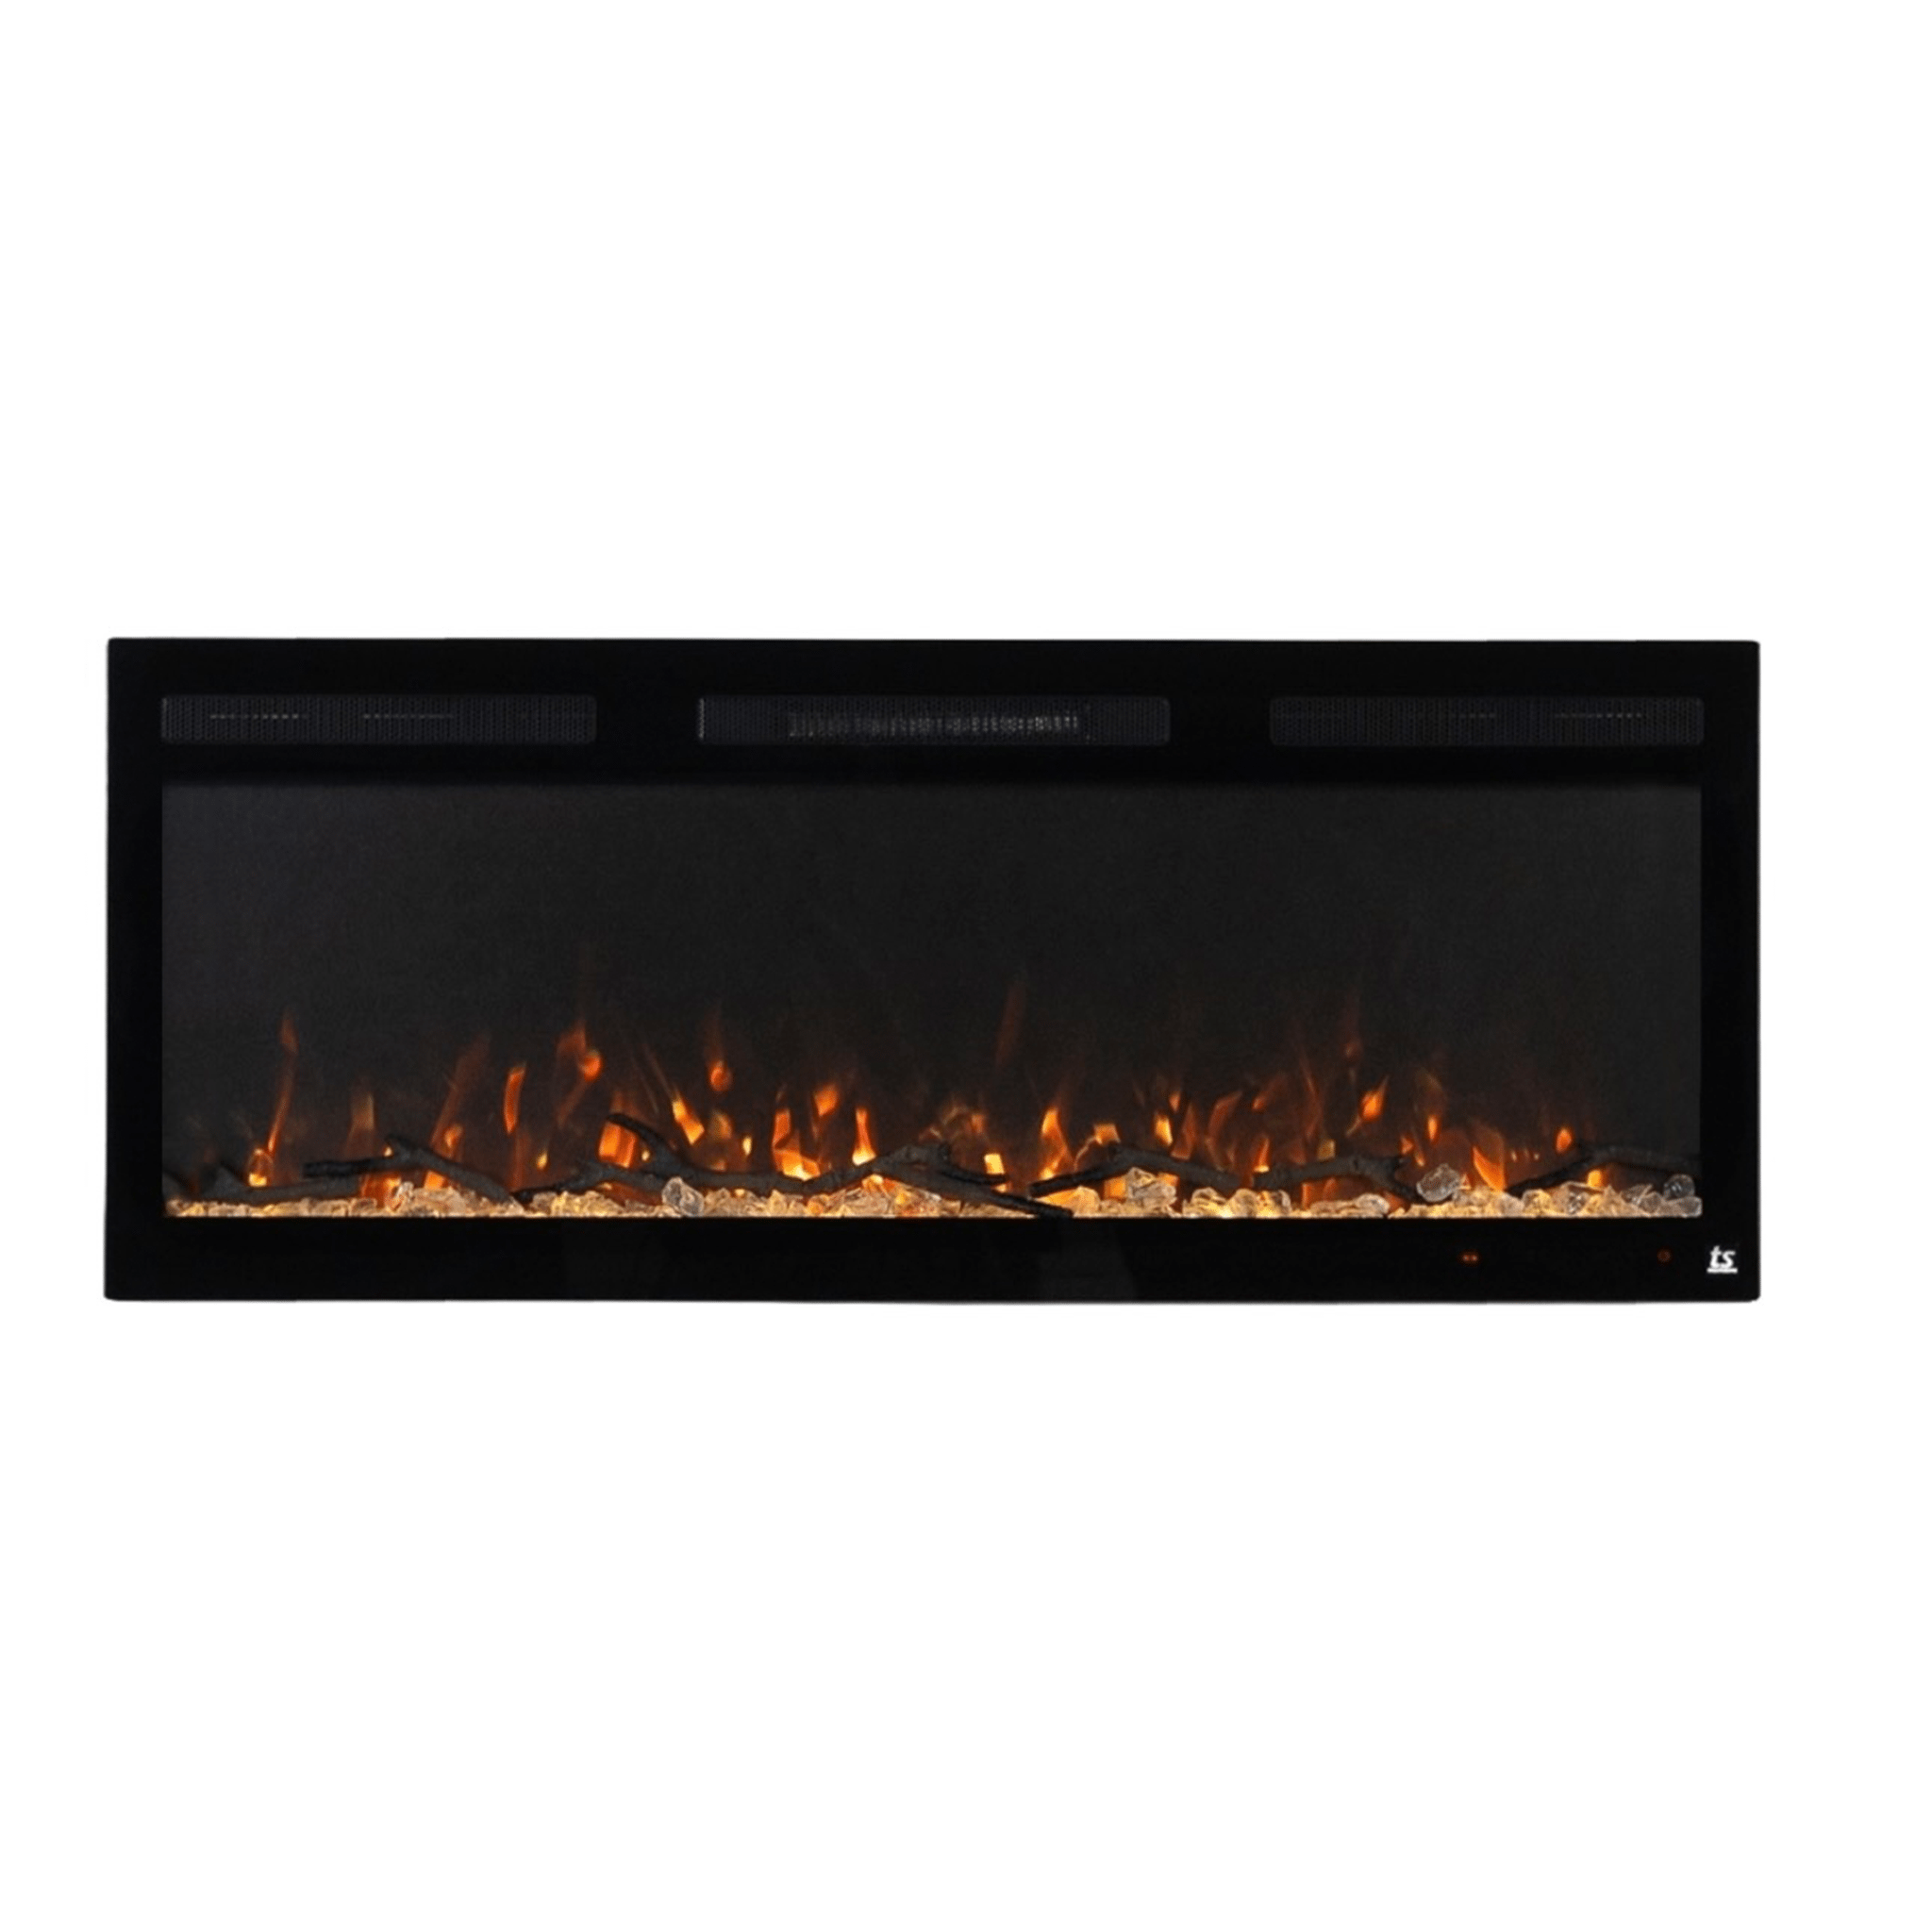 Sideline Fury 57 Inch Electric Fireplace on white background